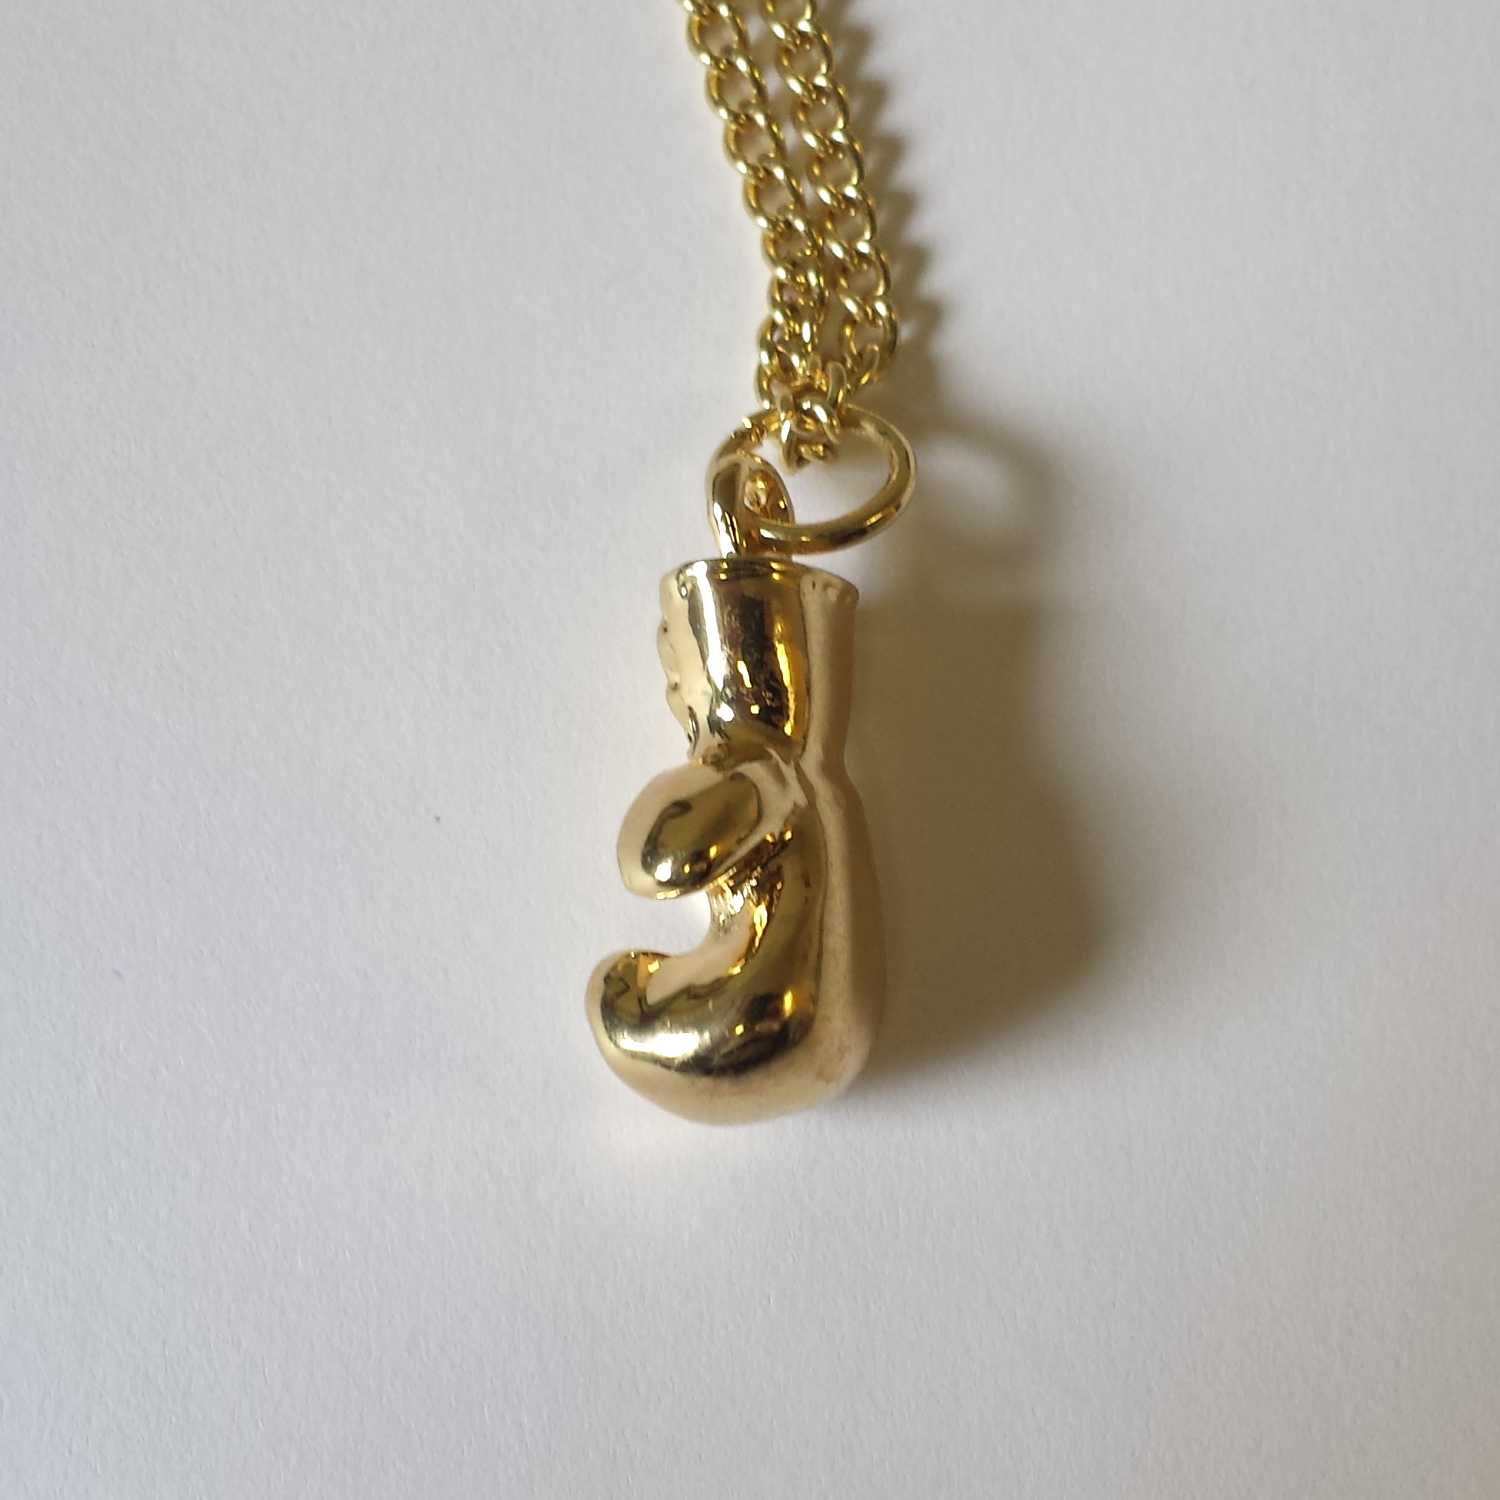 Rocky Balboa Gold Chain Necklace